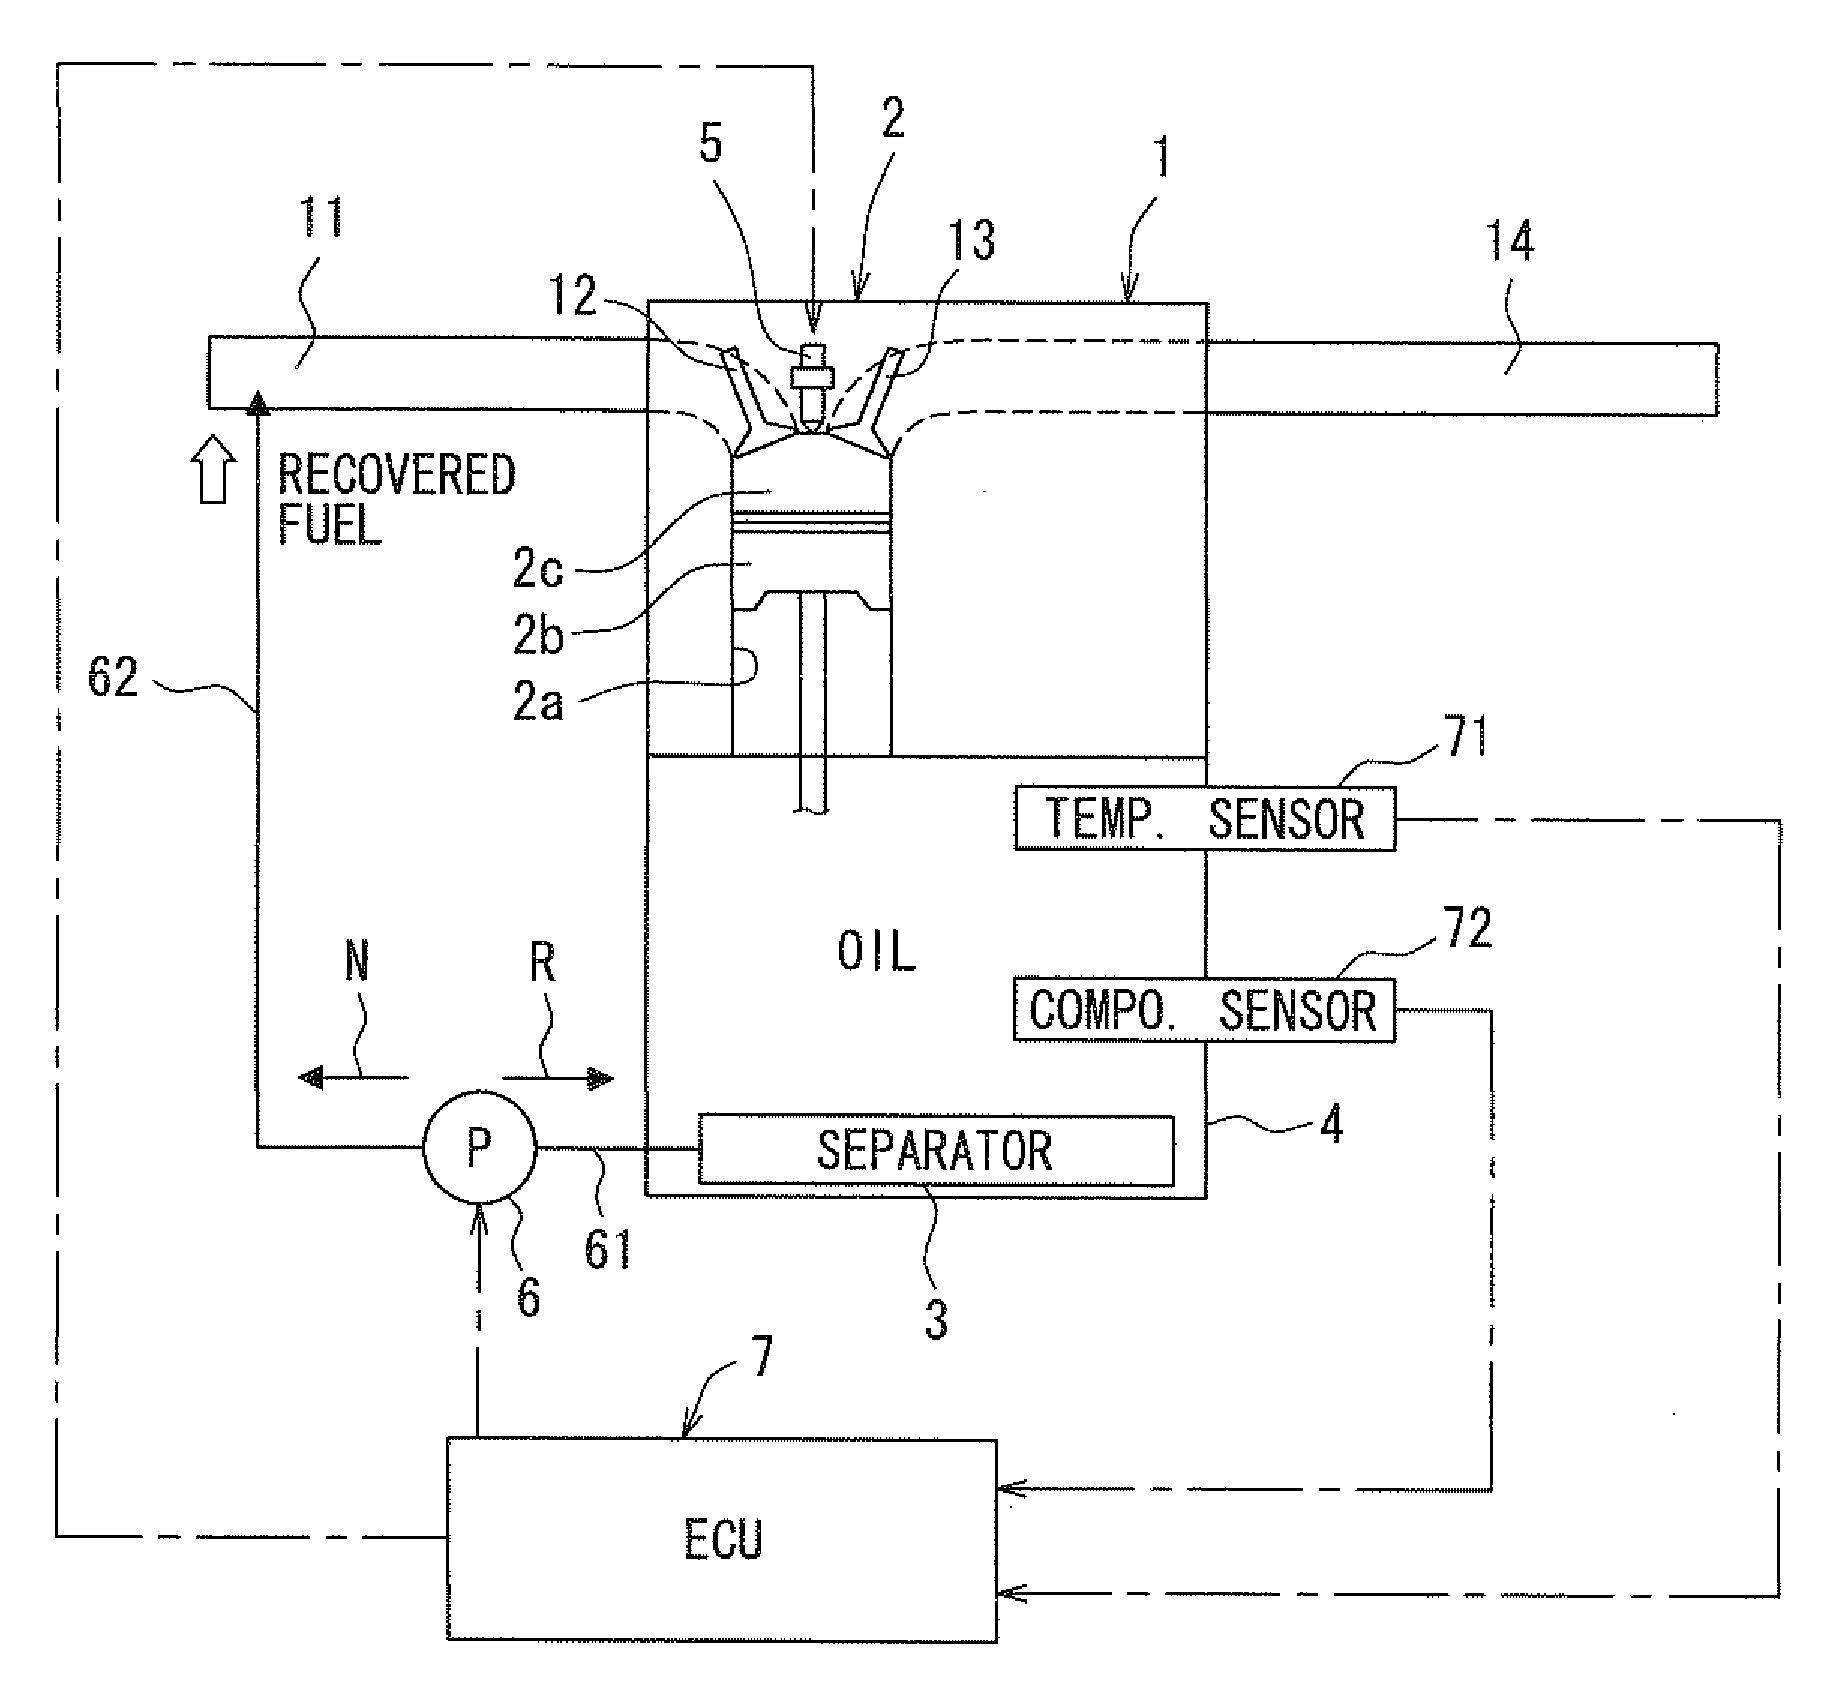 Dilution limiting device